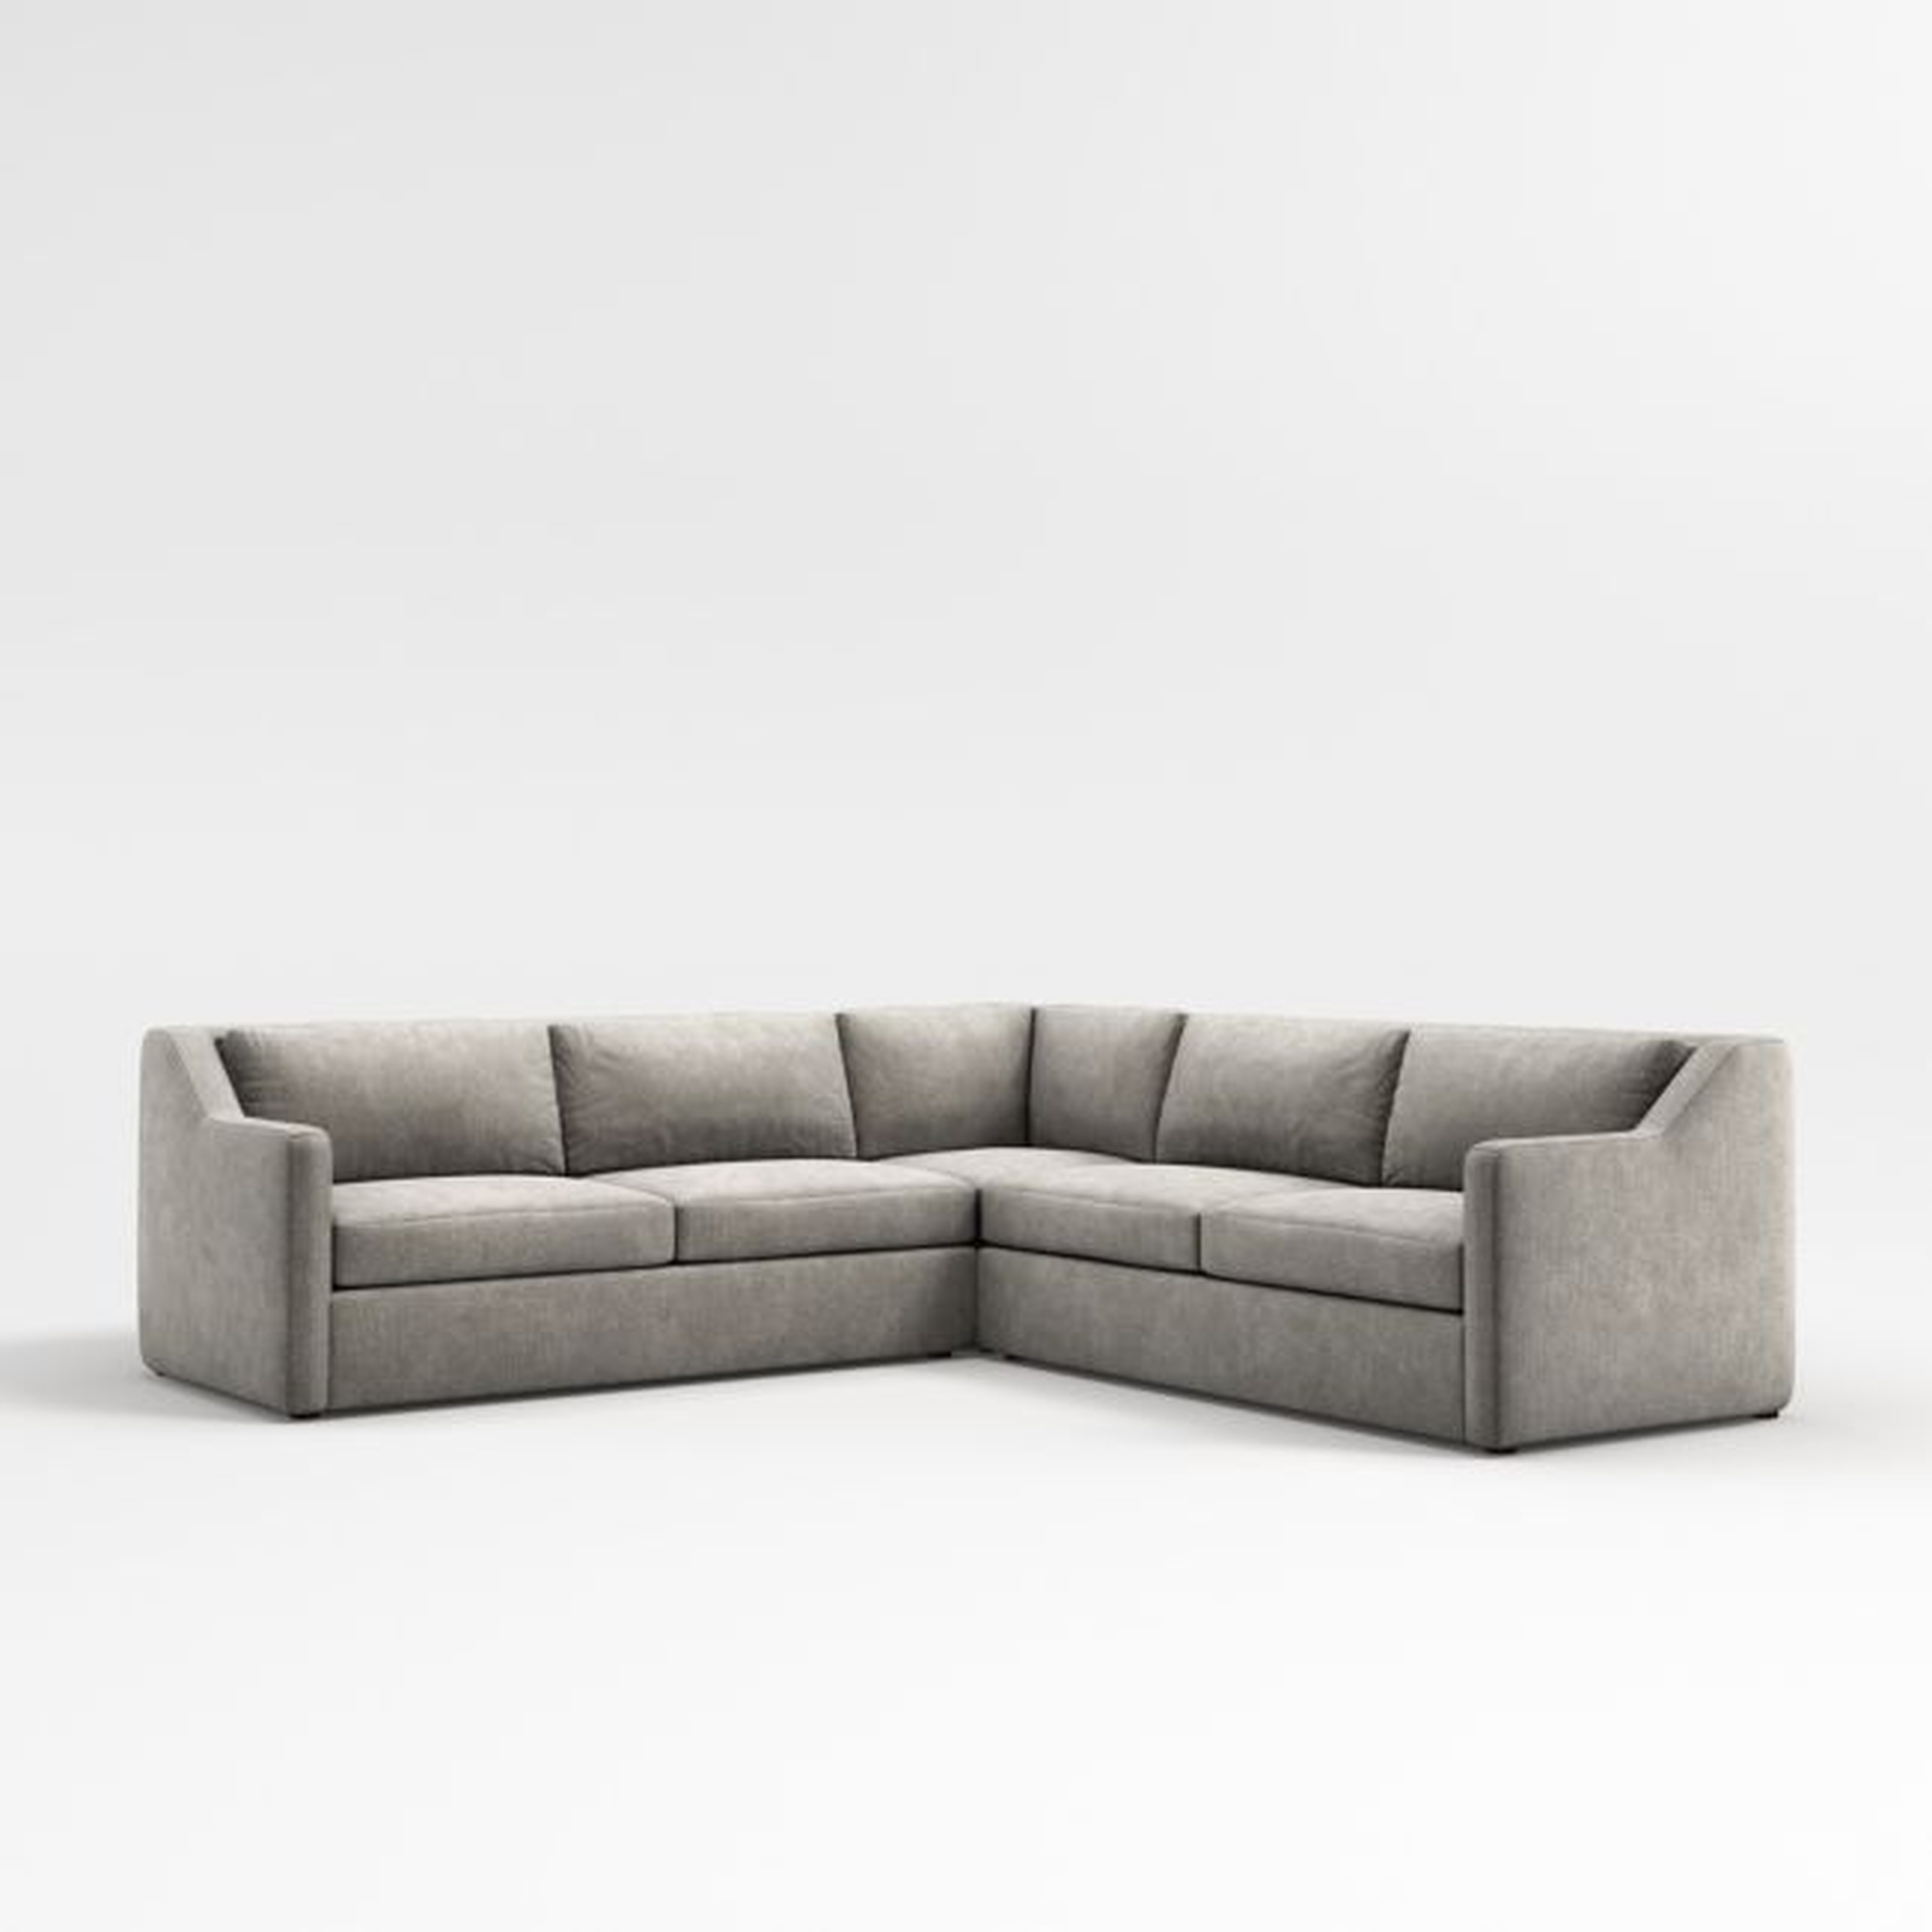 Notch L-Shaped Sectional Sofa - Crate and Barrel